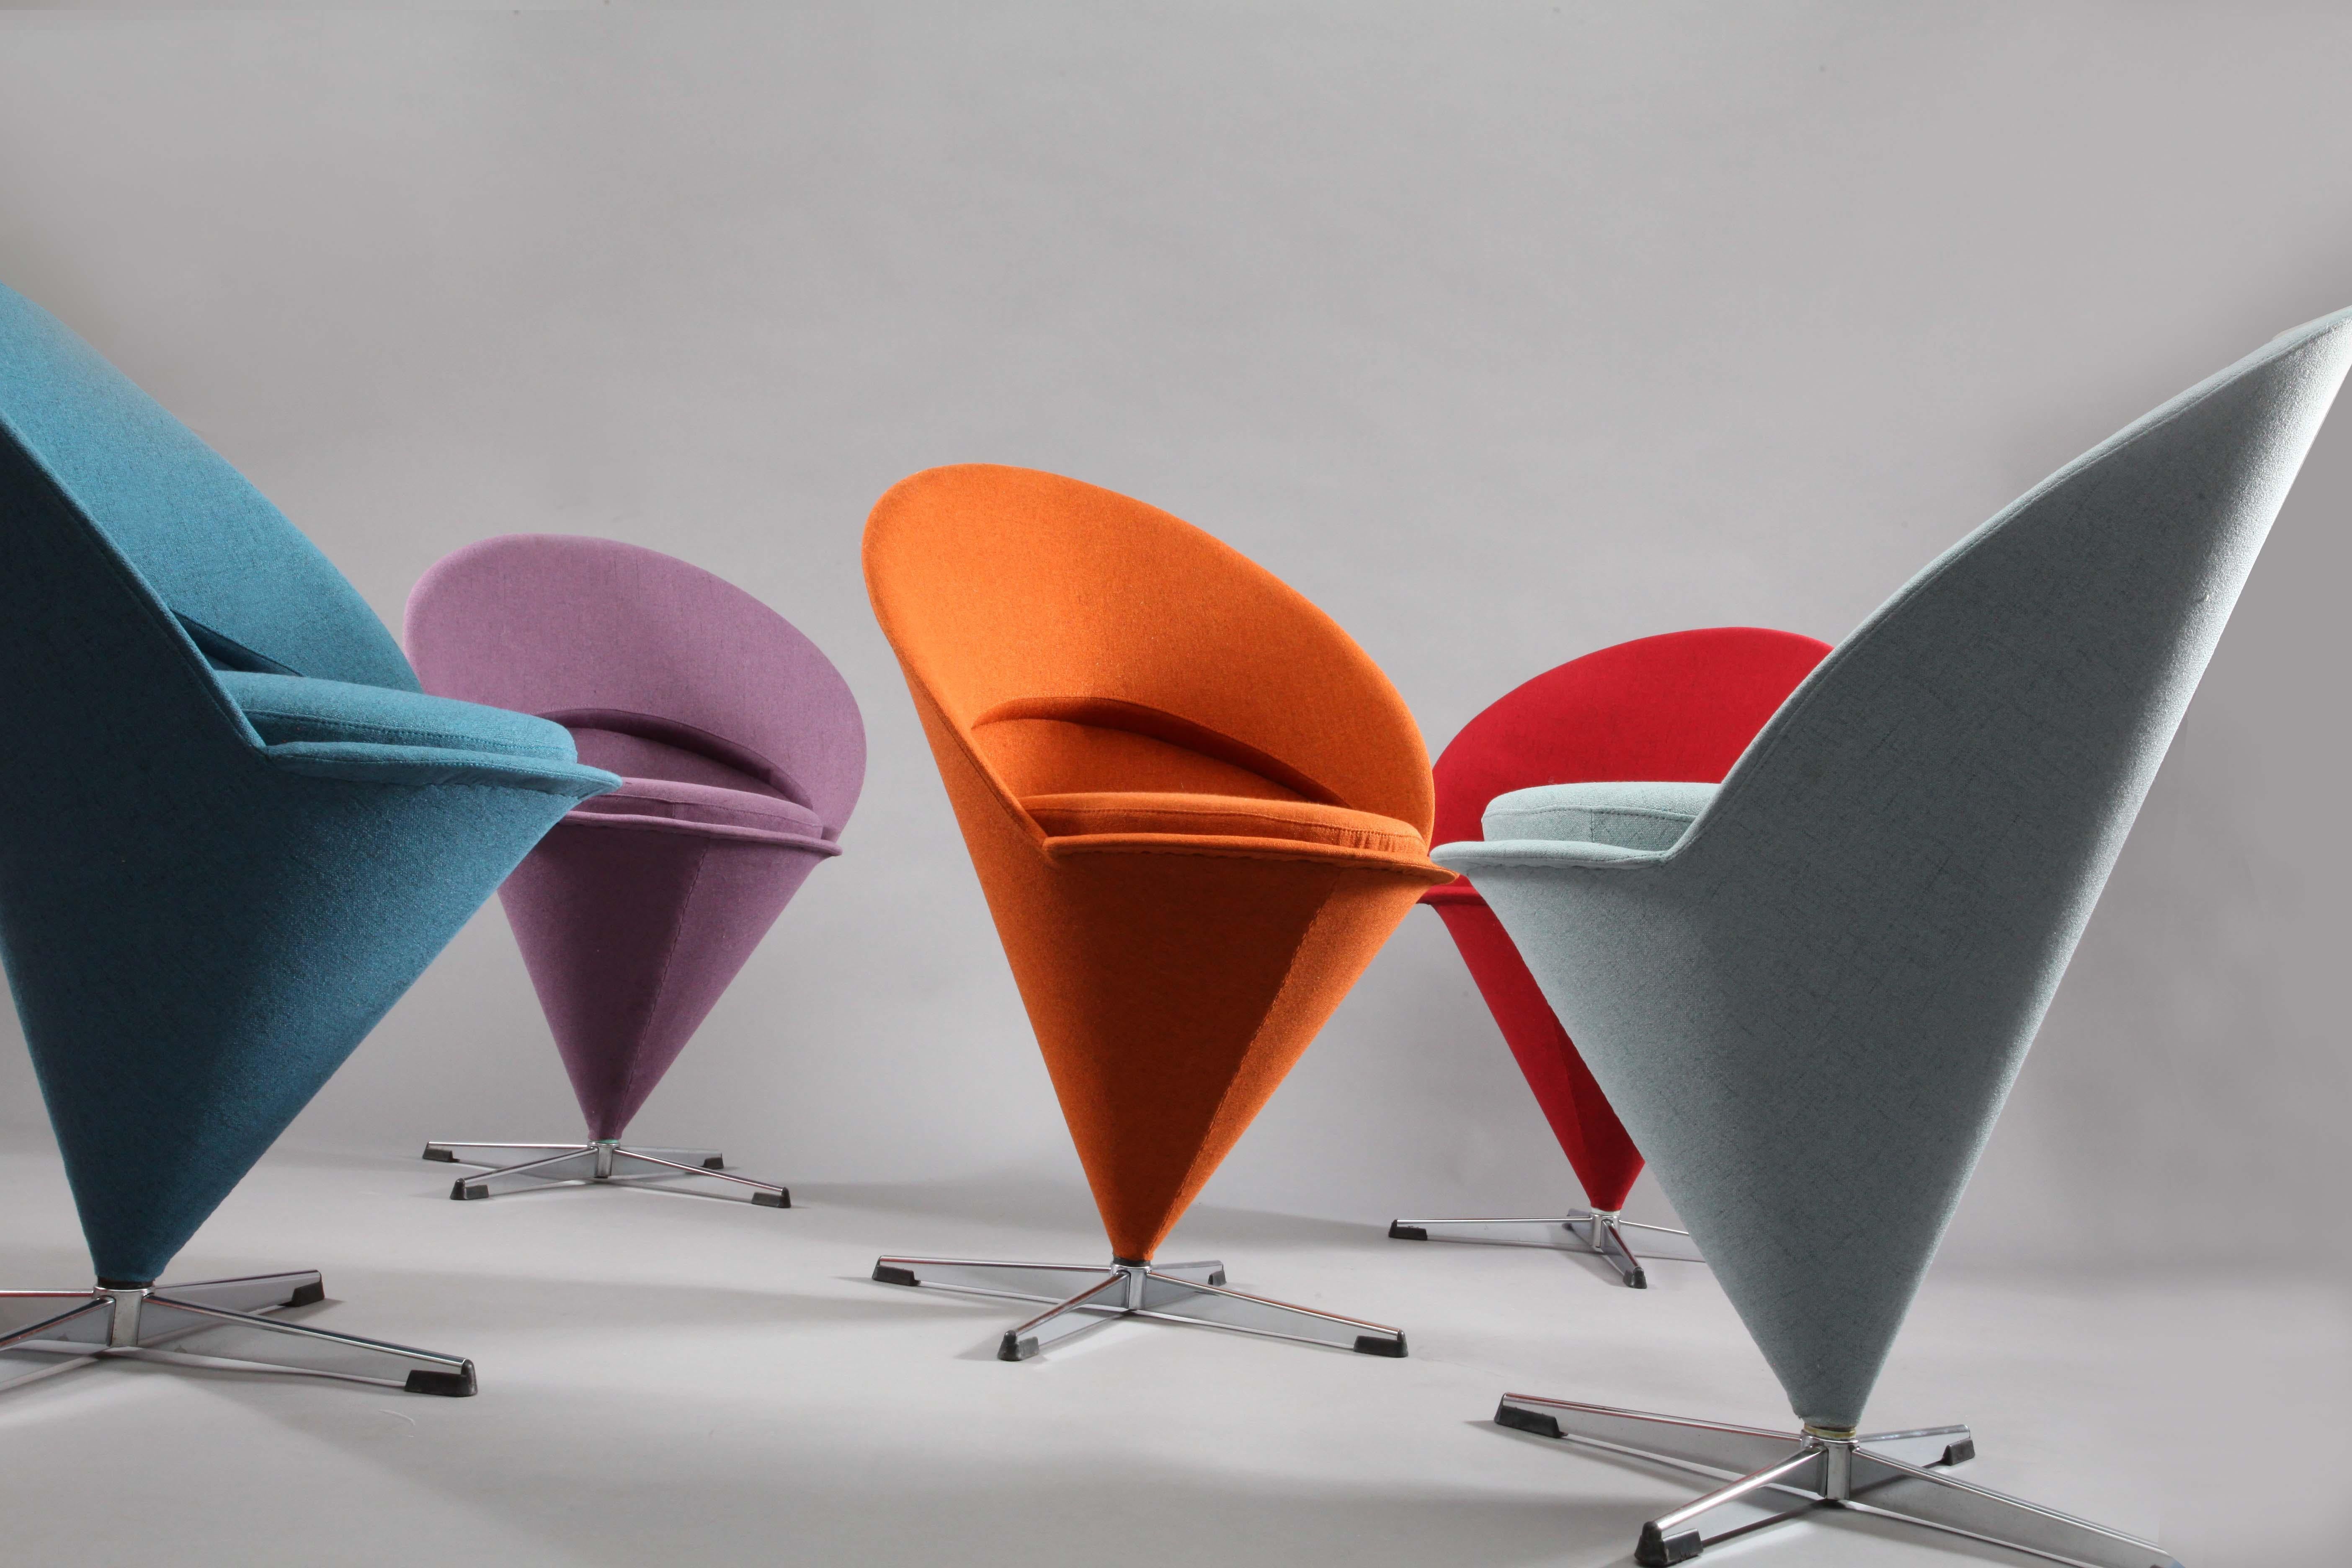 Five Cone chairs,
Modell K series designed by Verner Panton for Rosenthal,
Denmark 1958.
Chrome base, five different colors, new fabric, swiveling.